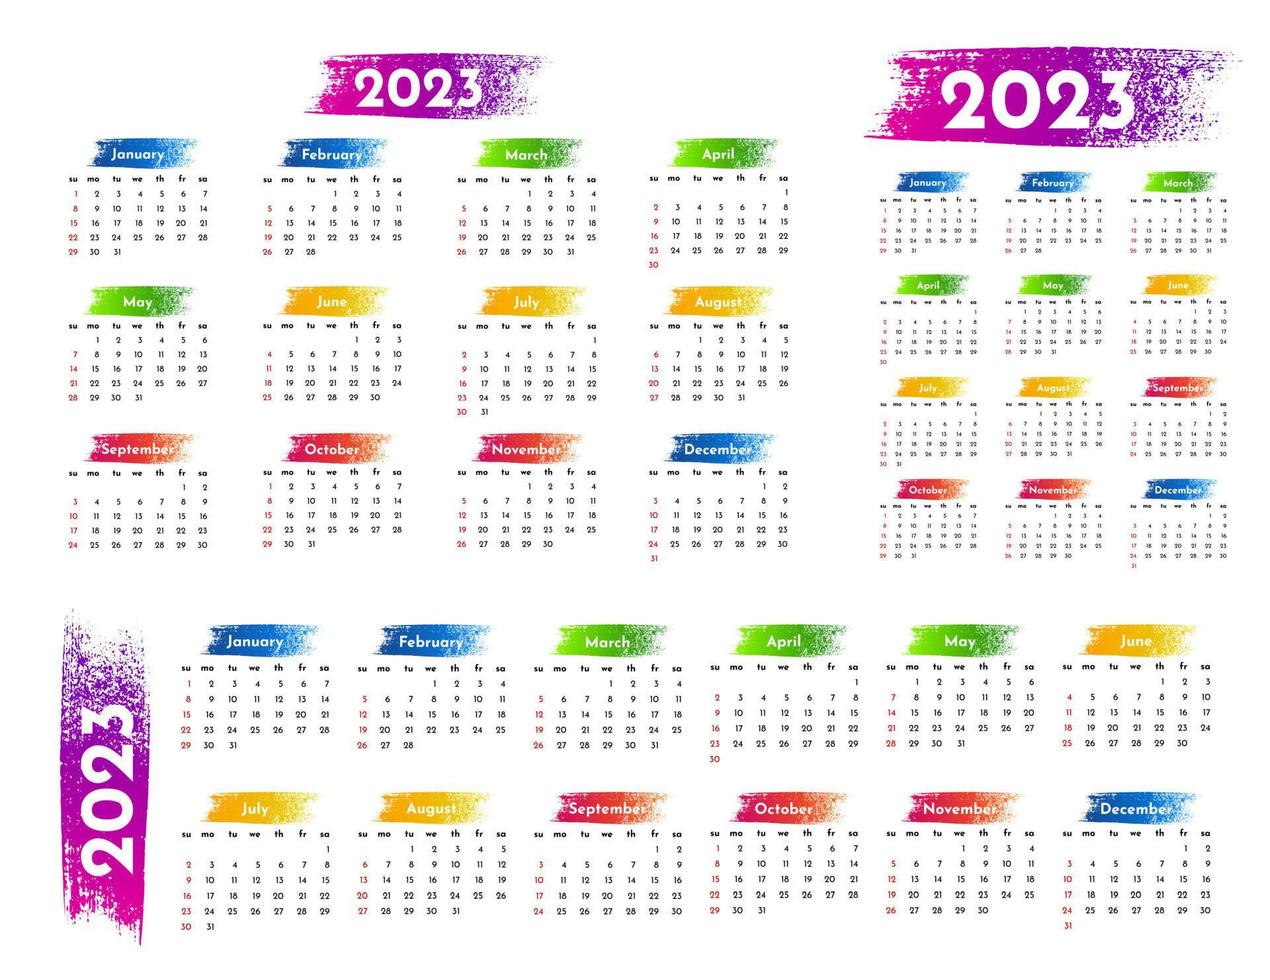 Calendar for 2023 isolated on a white background vector